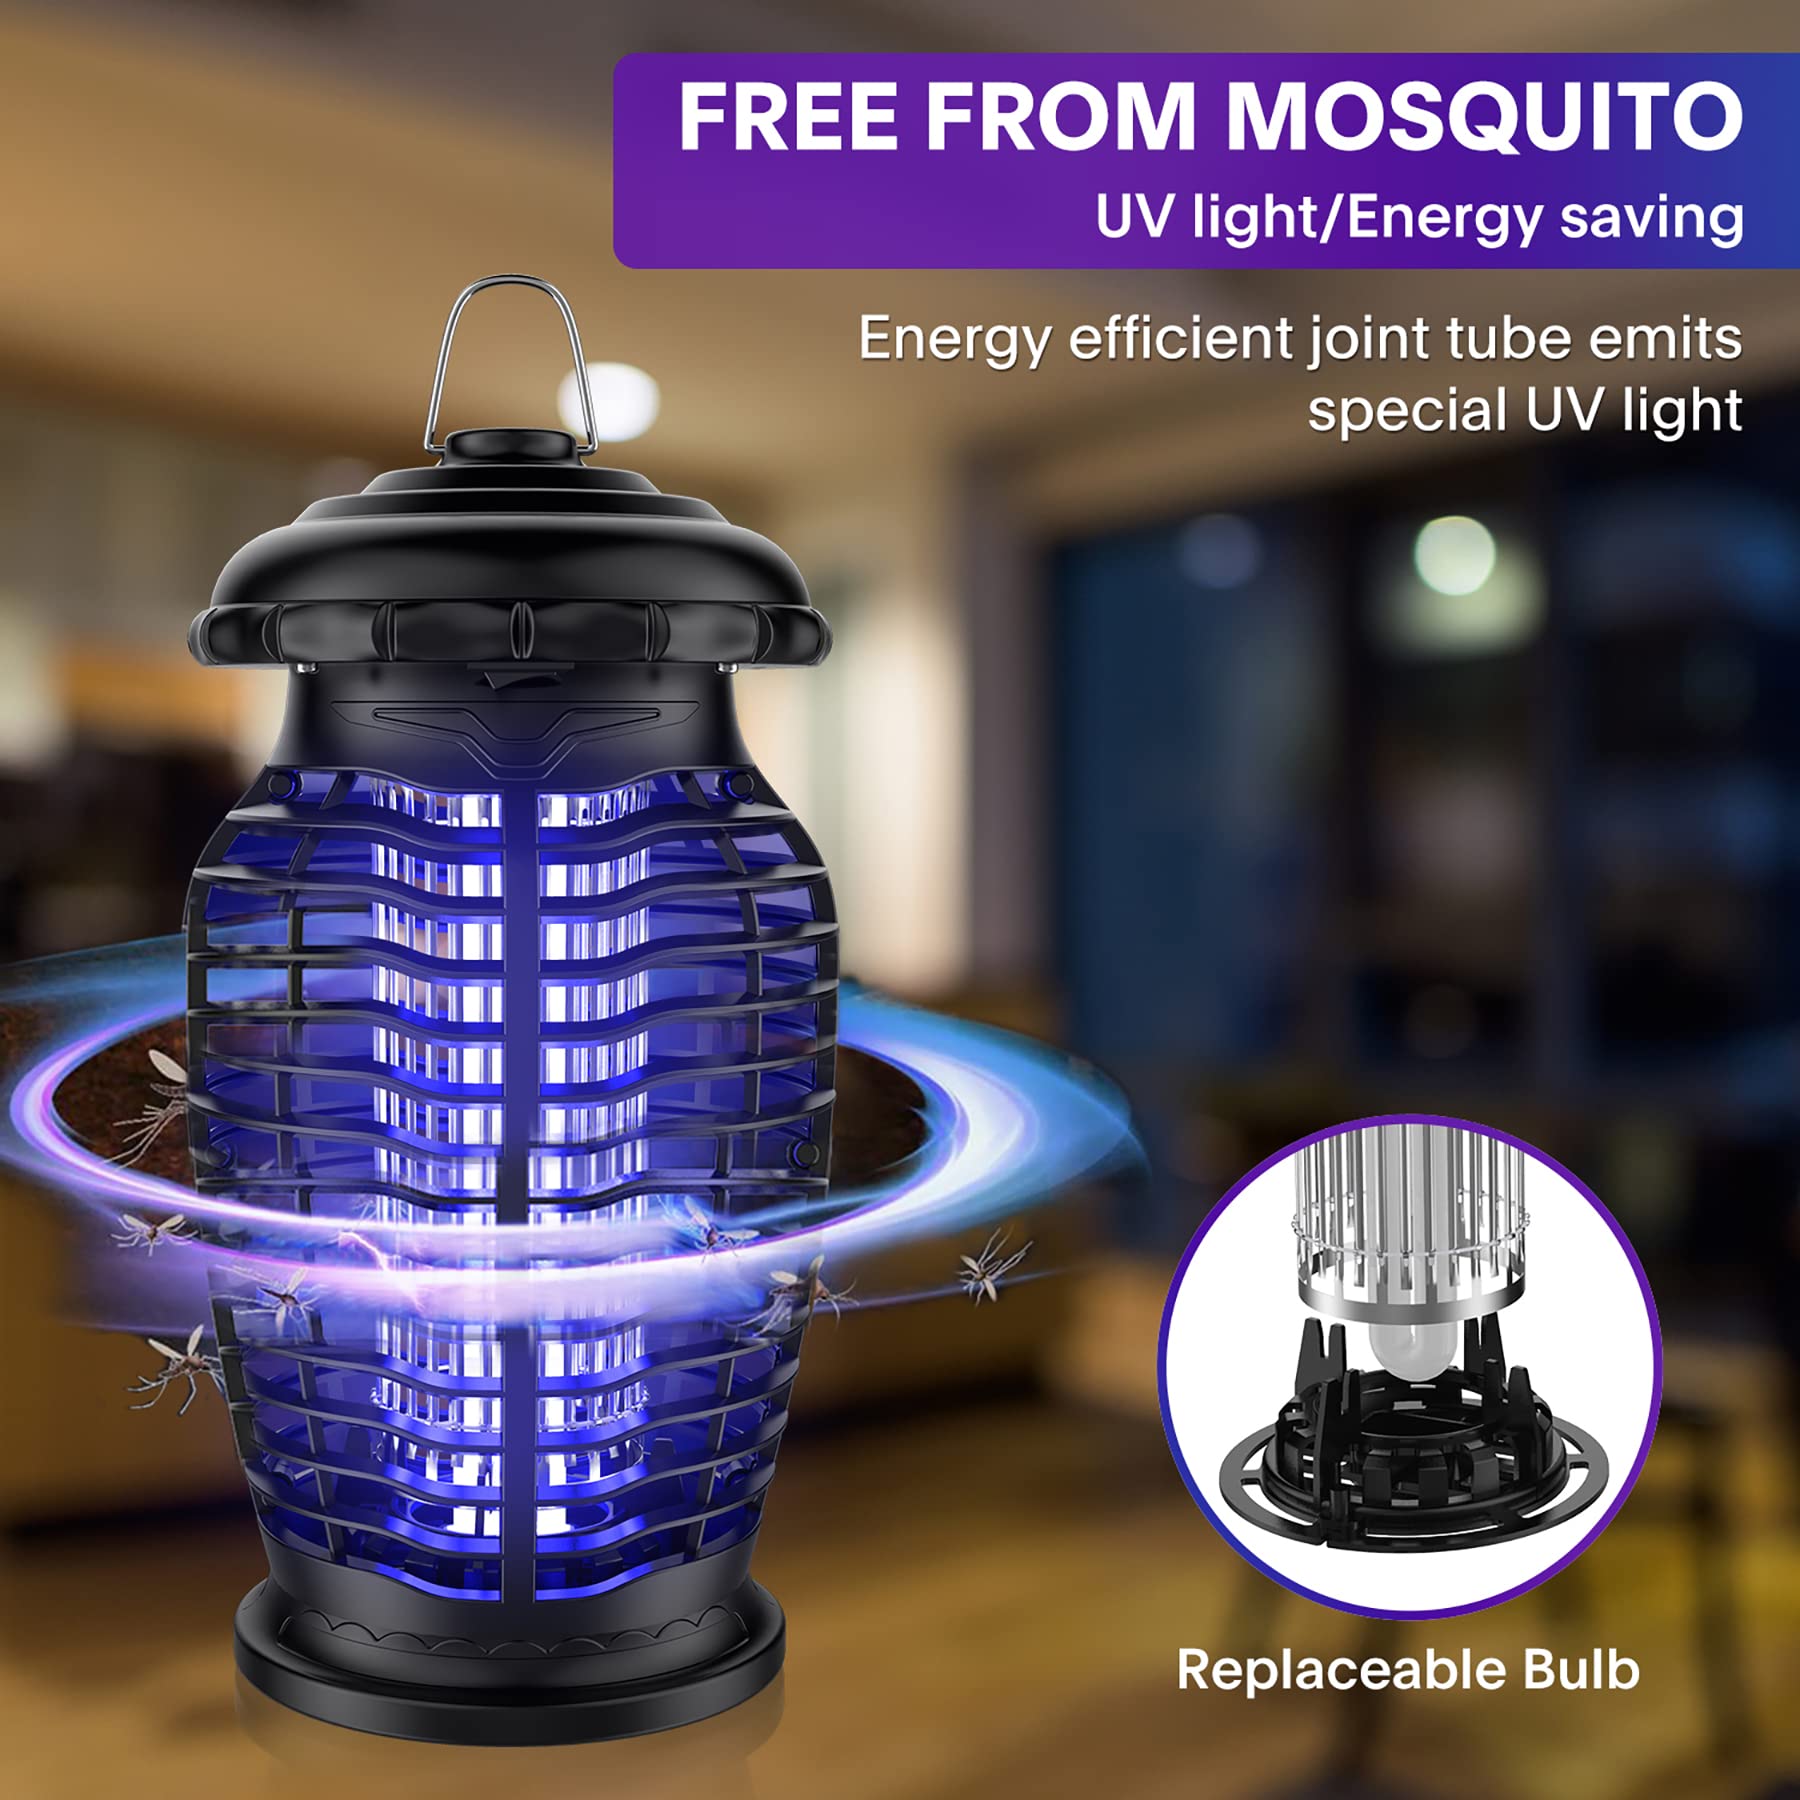 Bug Zapper - Mosquito Trap - Gnat Killer Insect Fly Zappers,Electronic Insect Killer for Home Backyard Patio